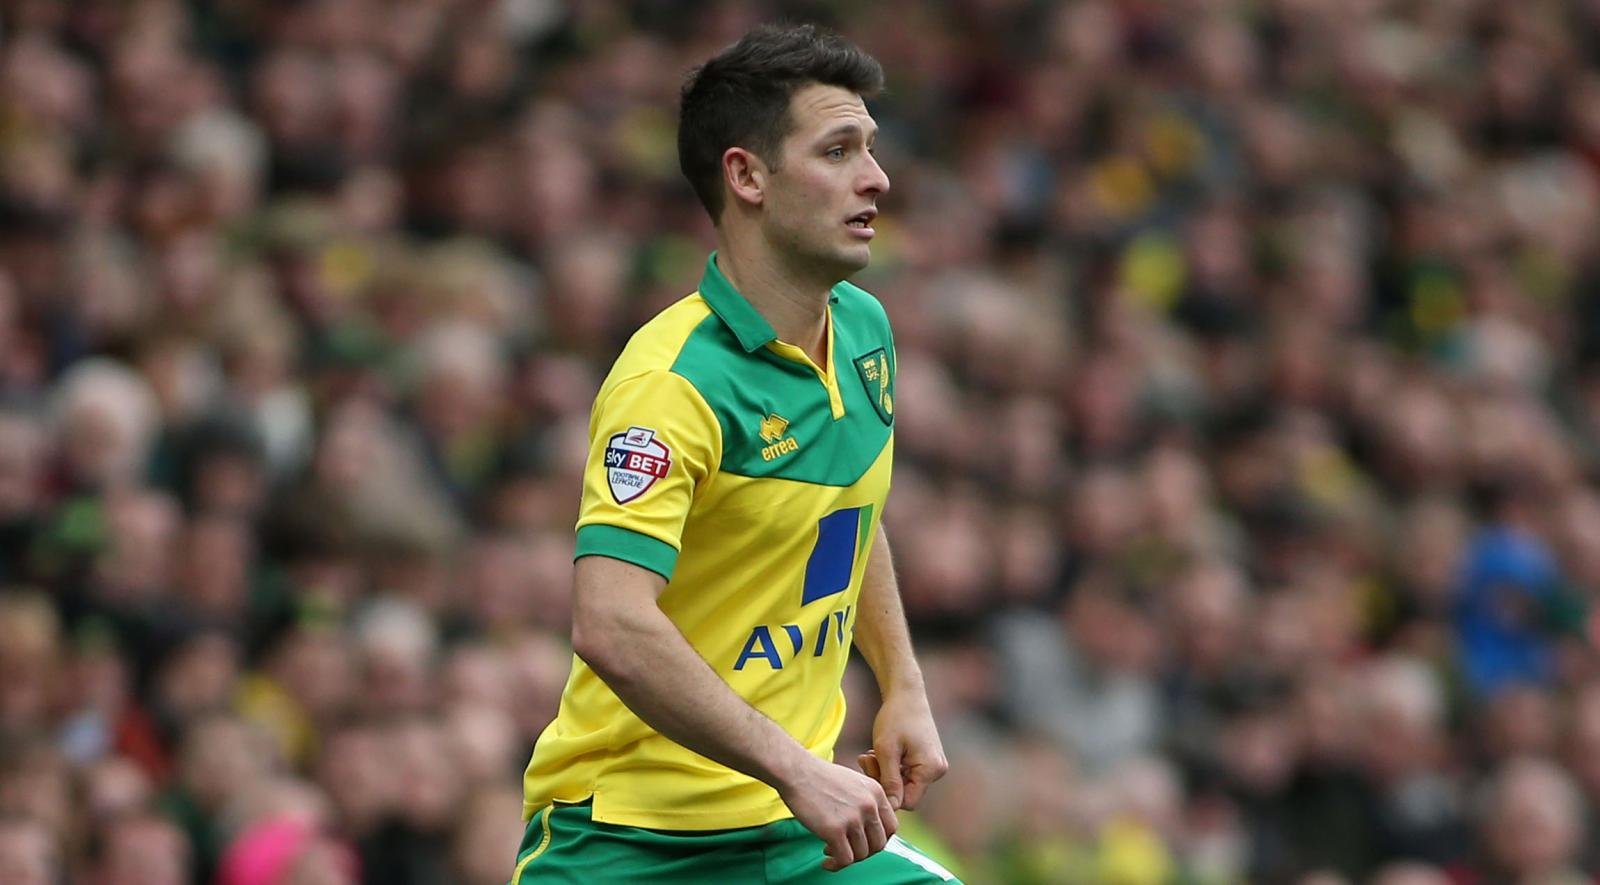 Super Wes is Norwich’s wizard